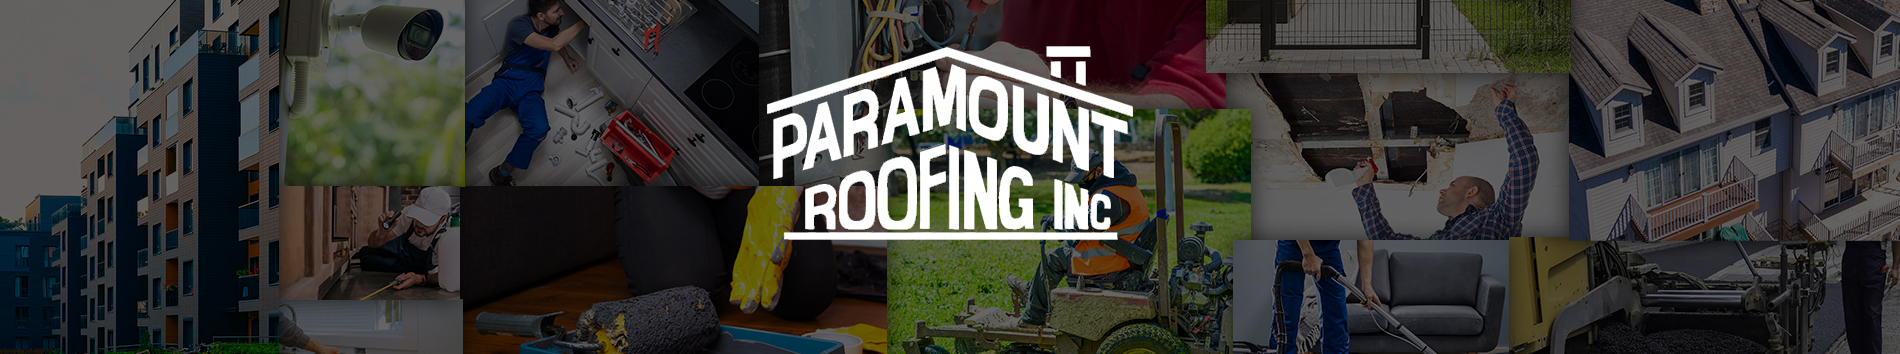 Paramount Roofing, Inc.